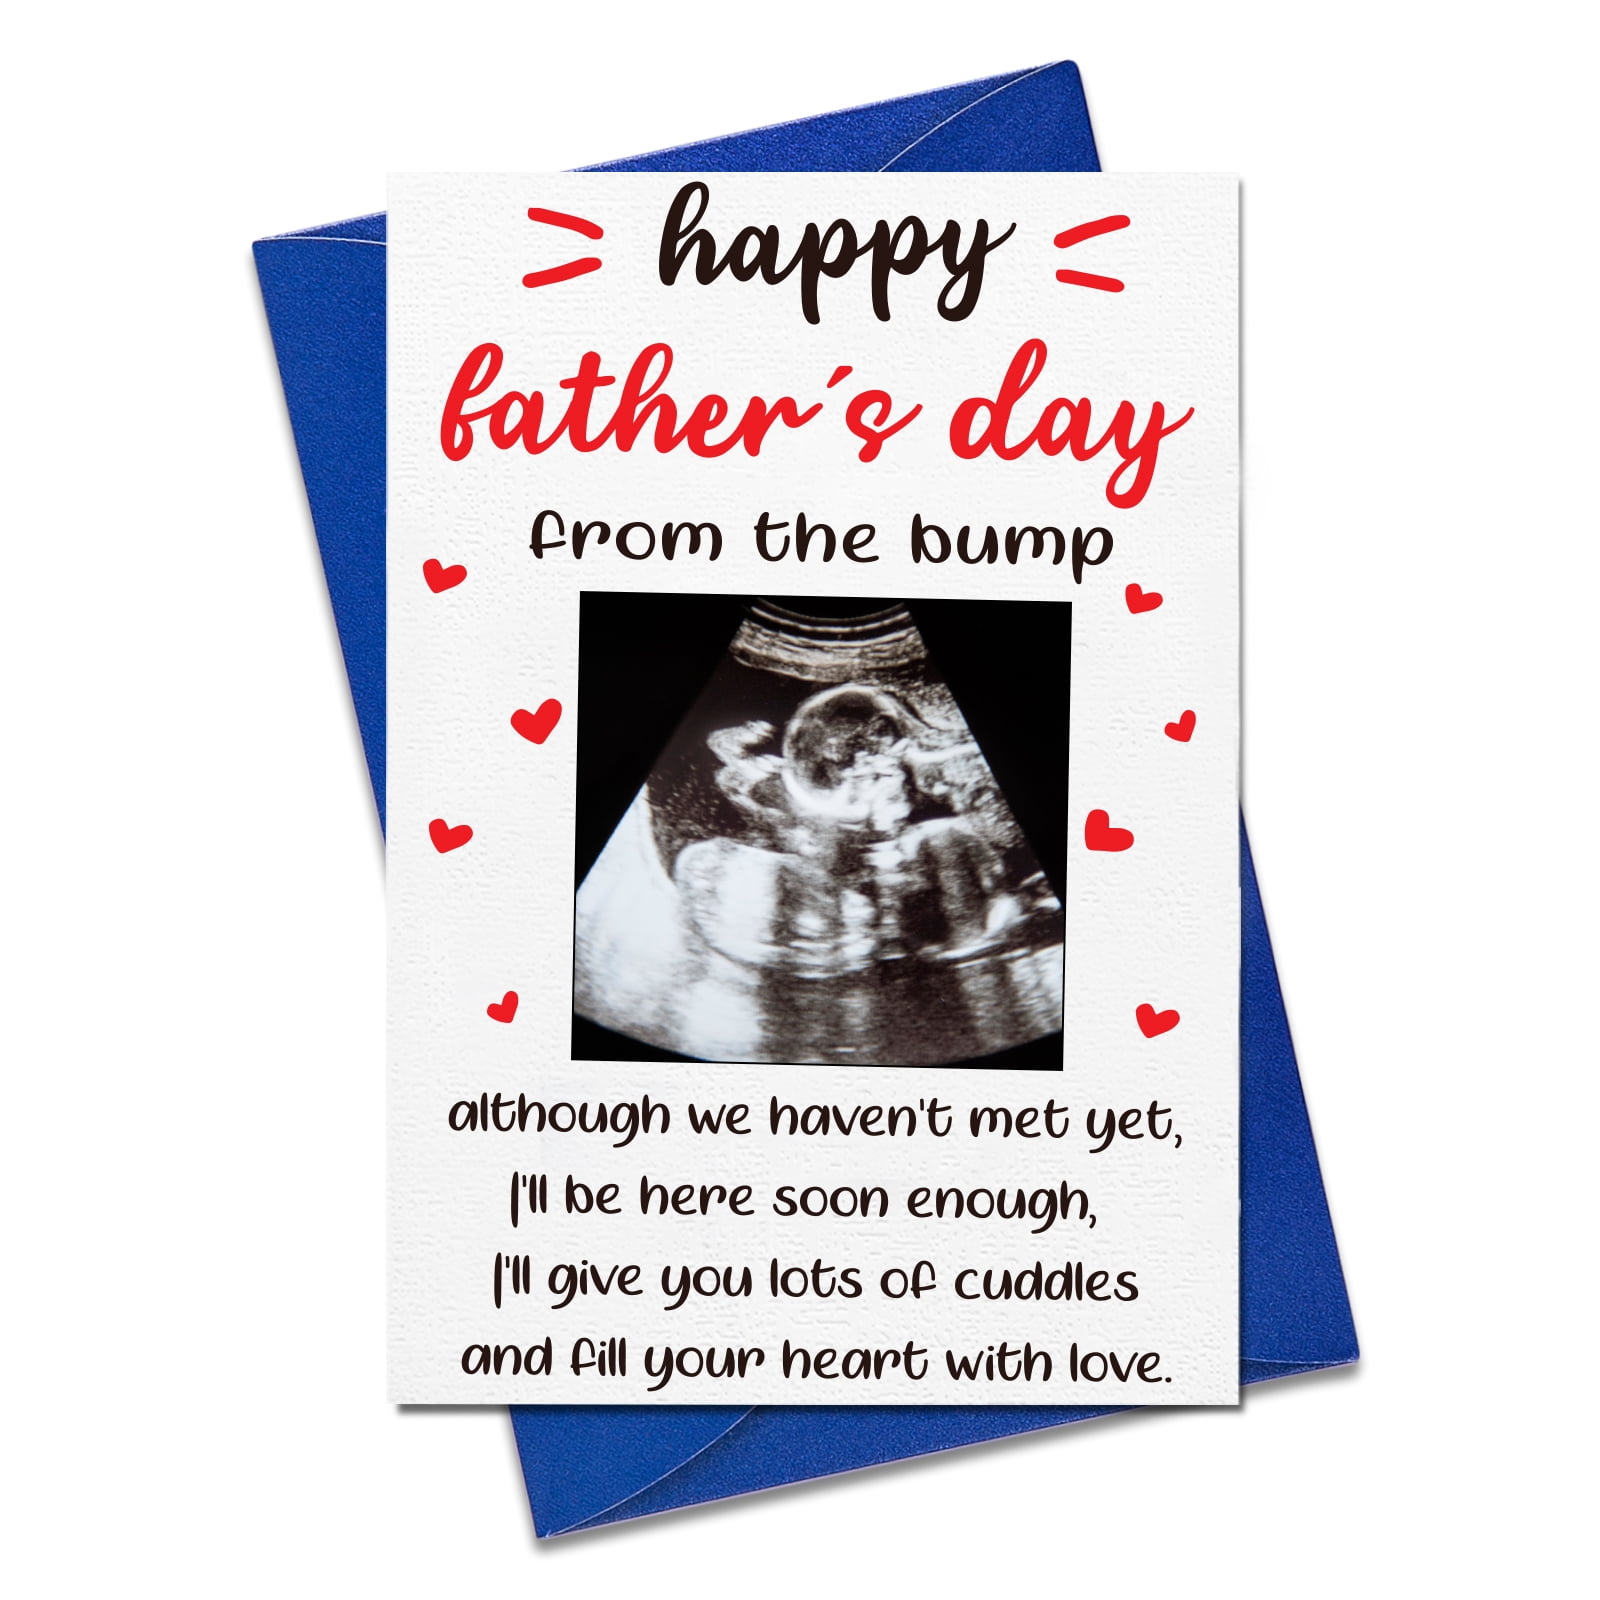 Funny Anniversary Birthday Card Funny Fathers Day card Hot Potato Cute Greeting Card for her/him 